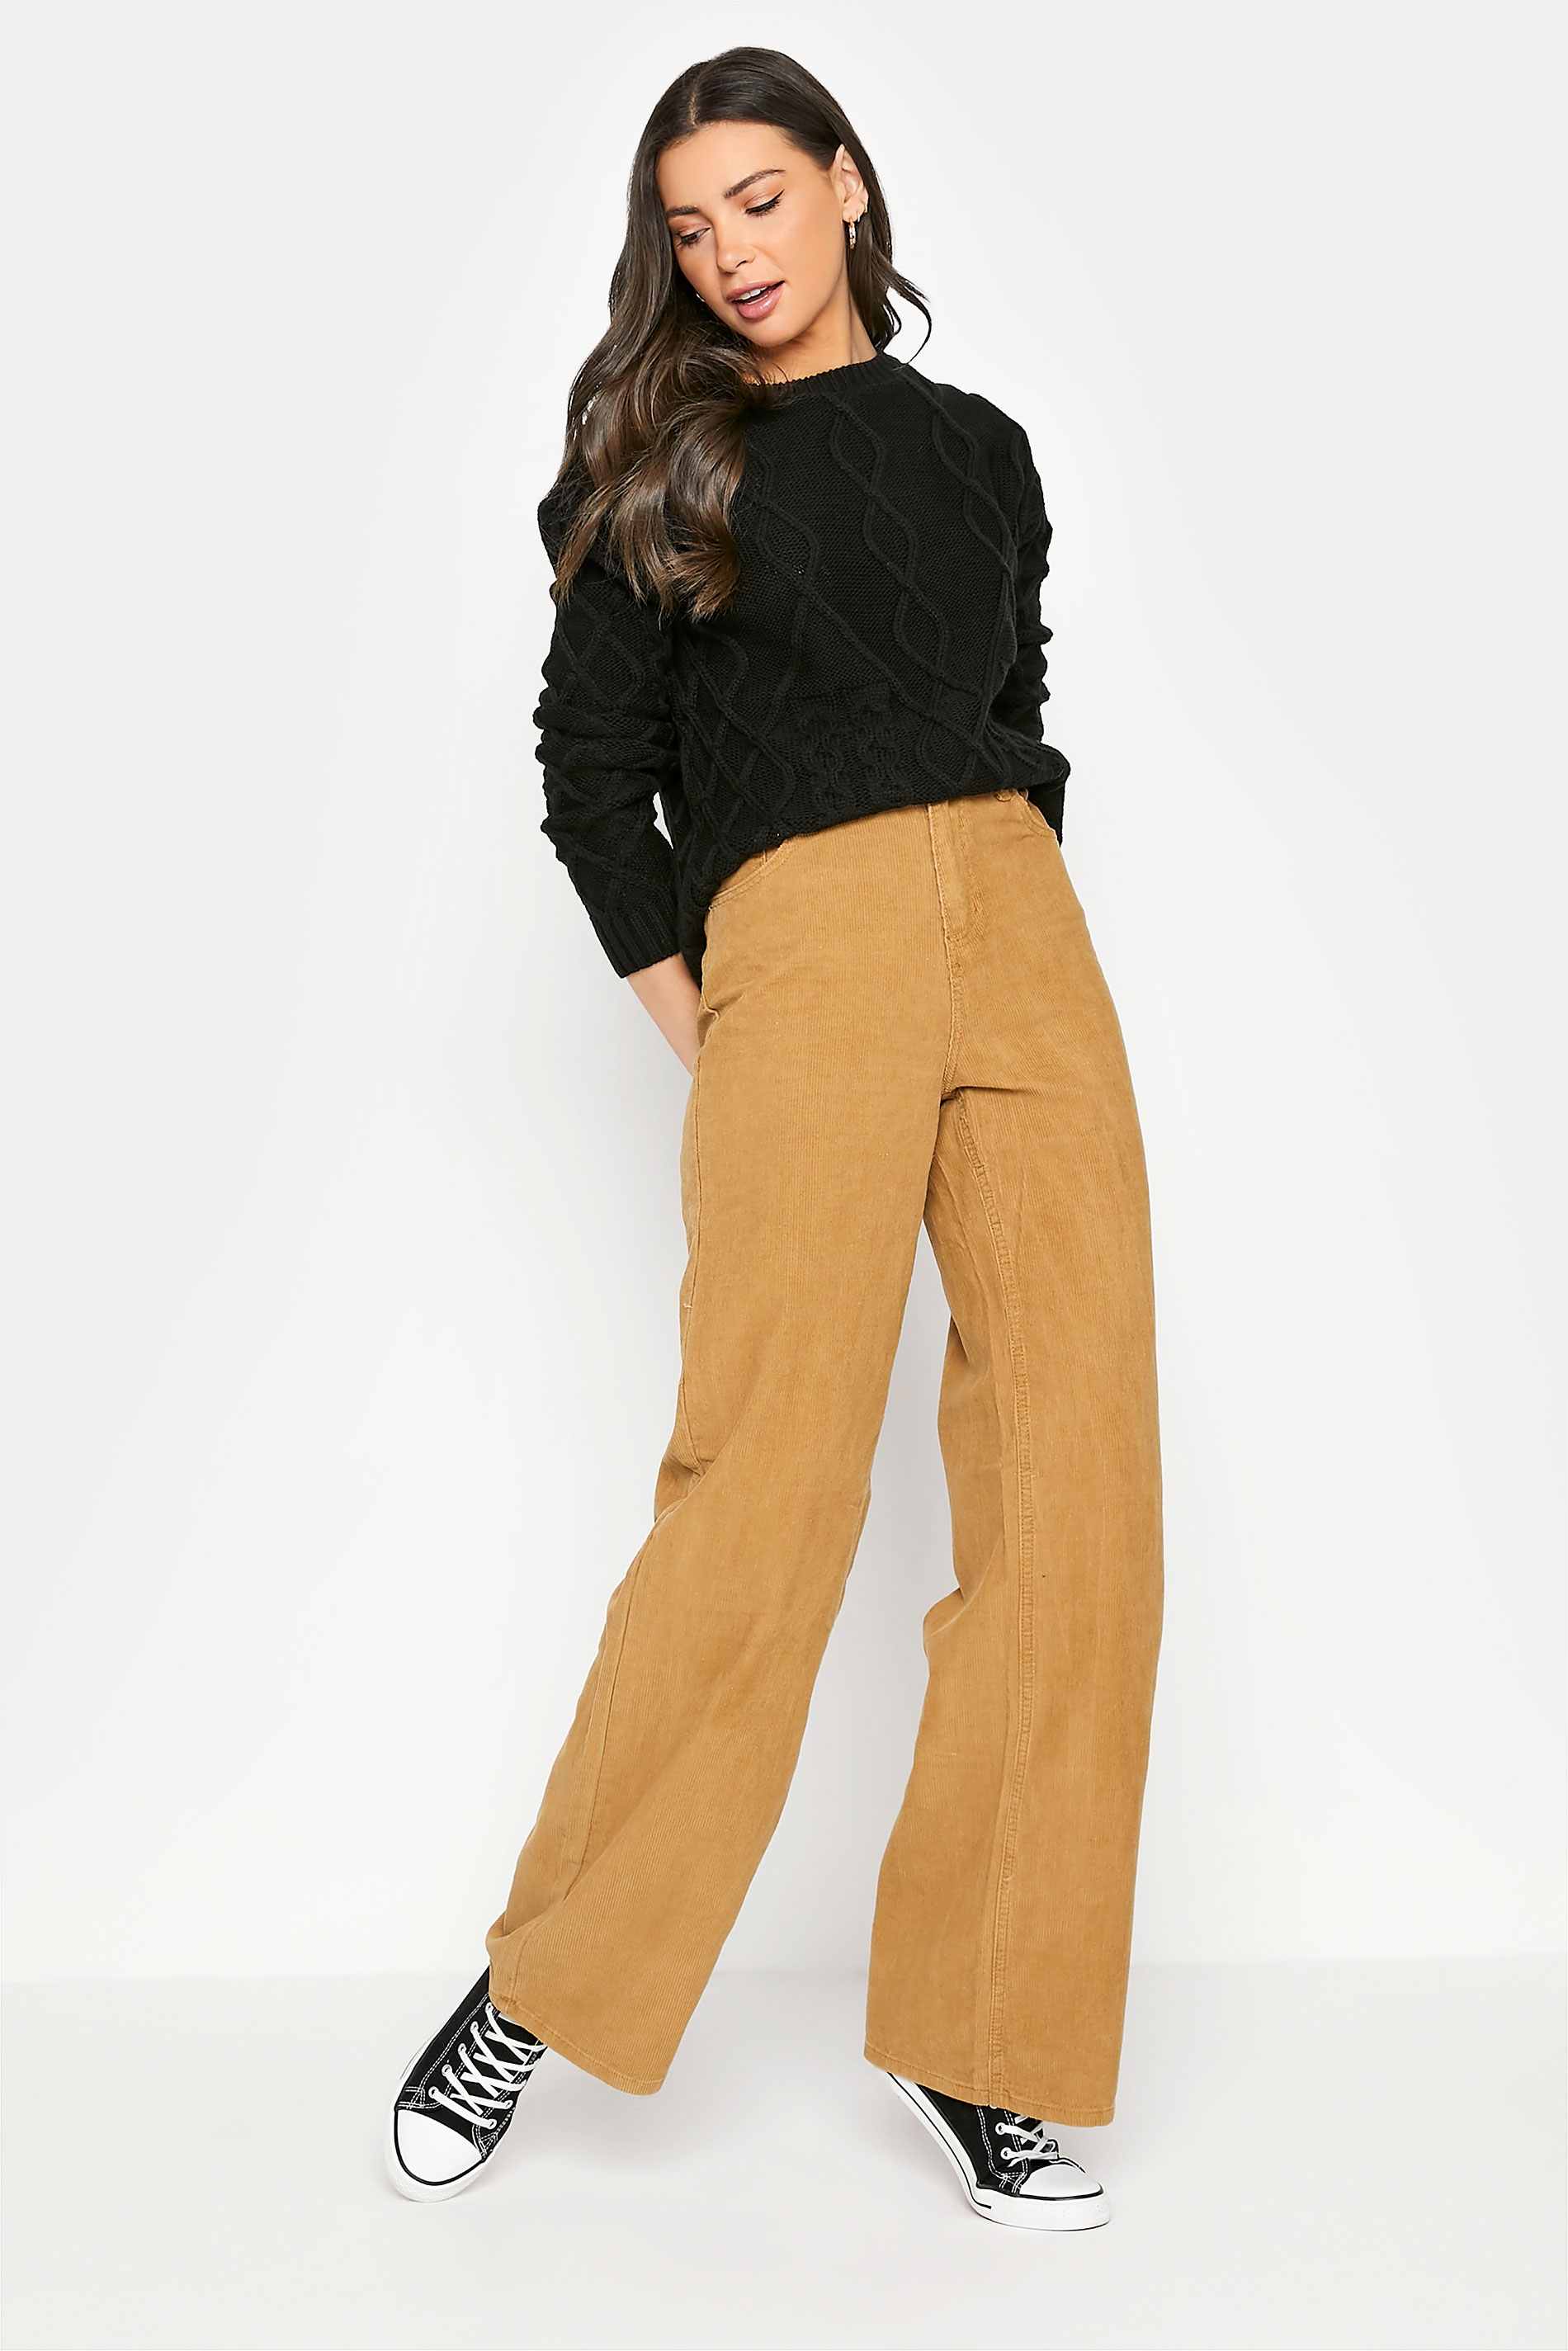 The Tall Perfect Vintage WideLeg Pant Utility Edition